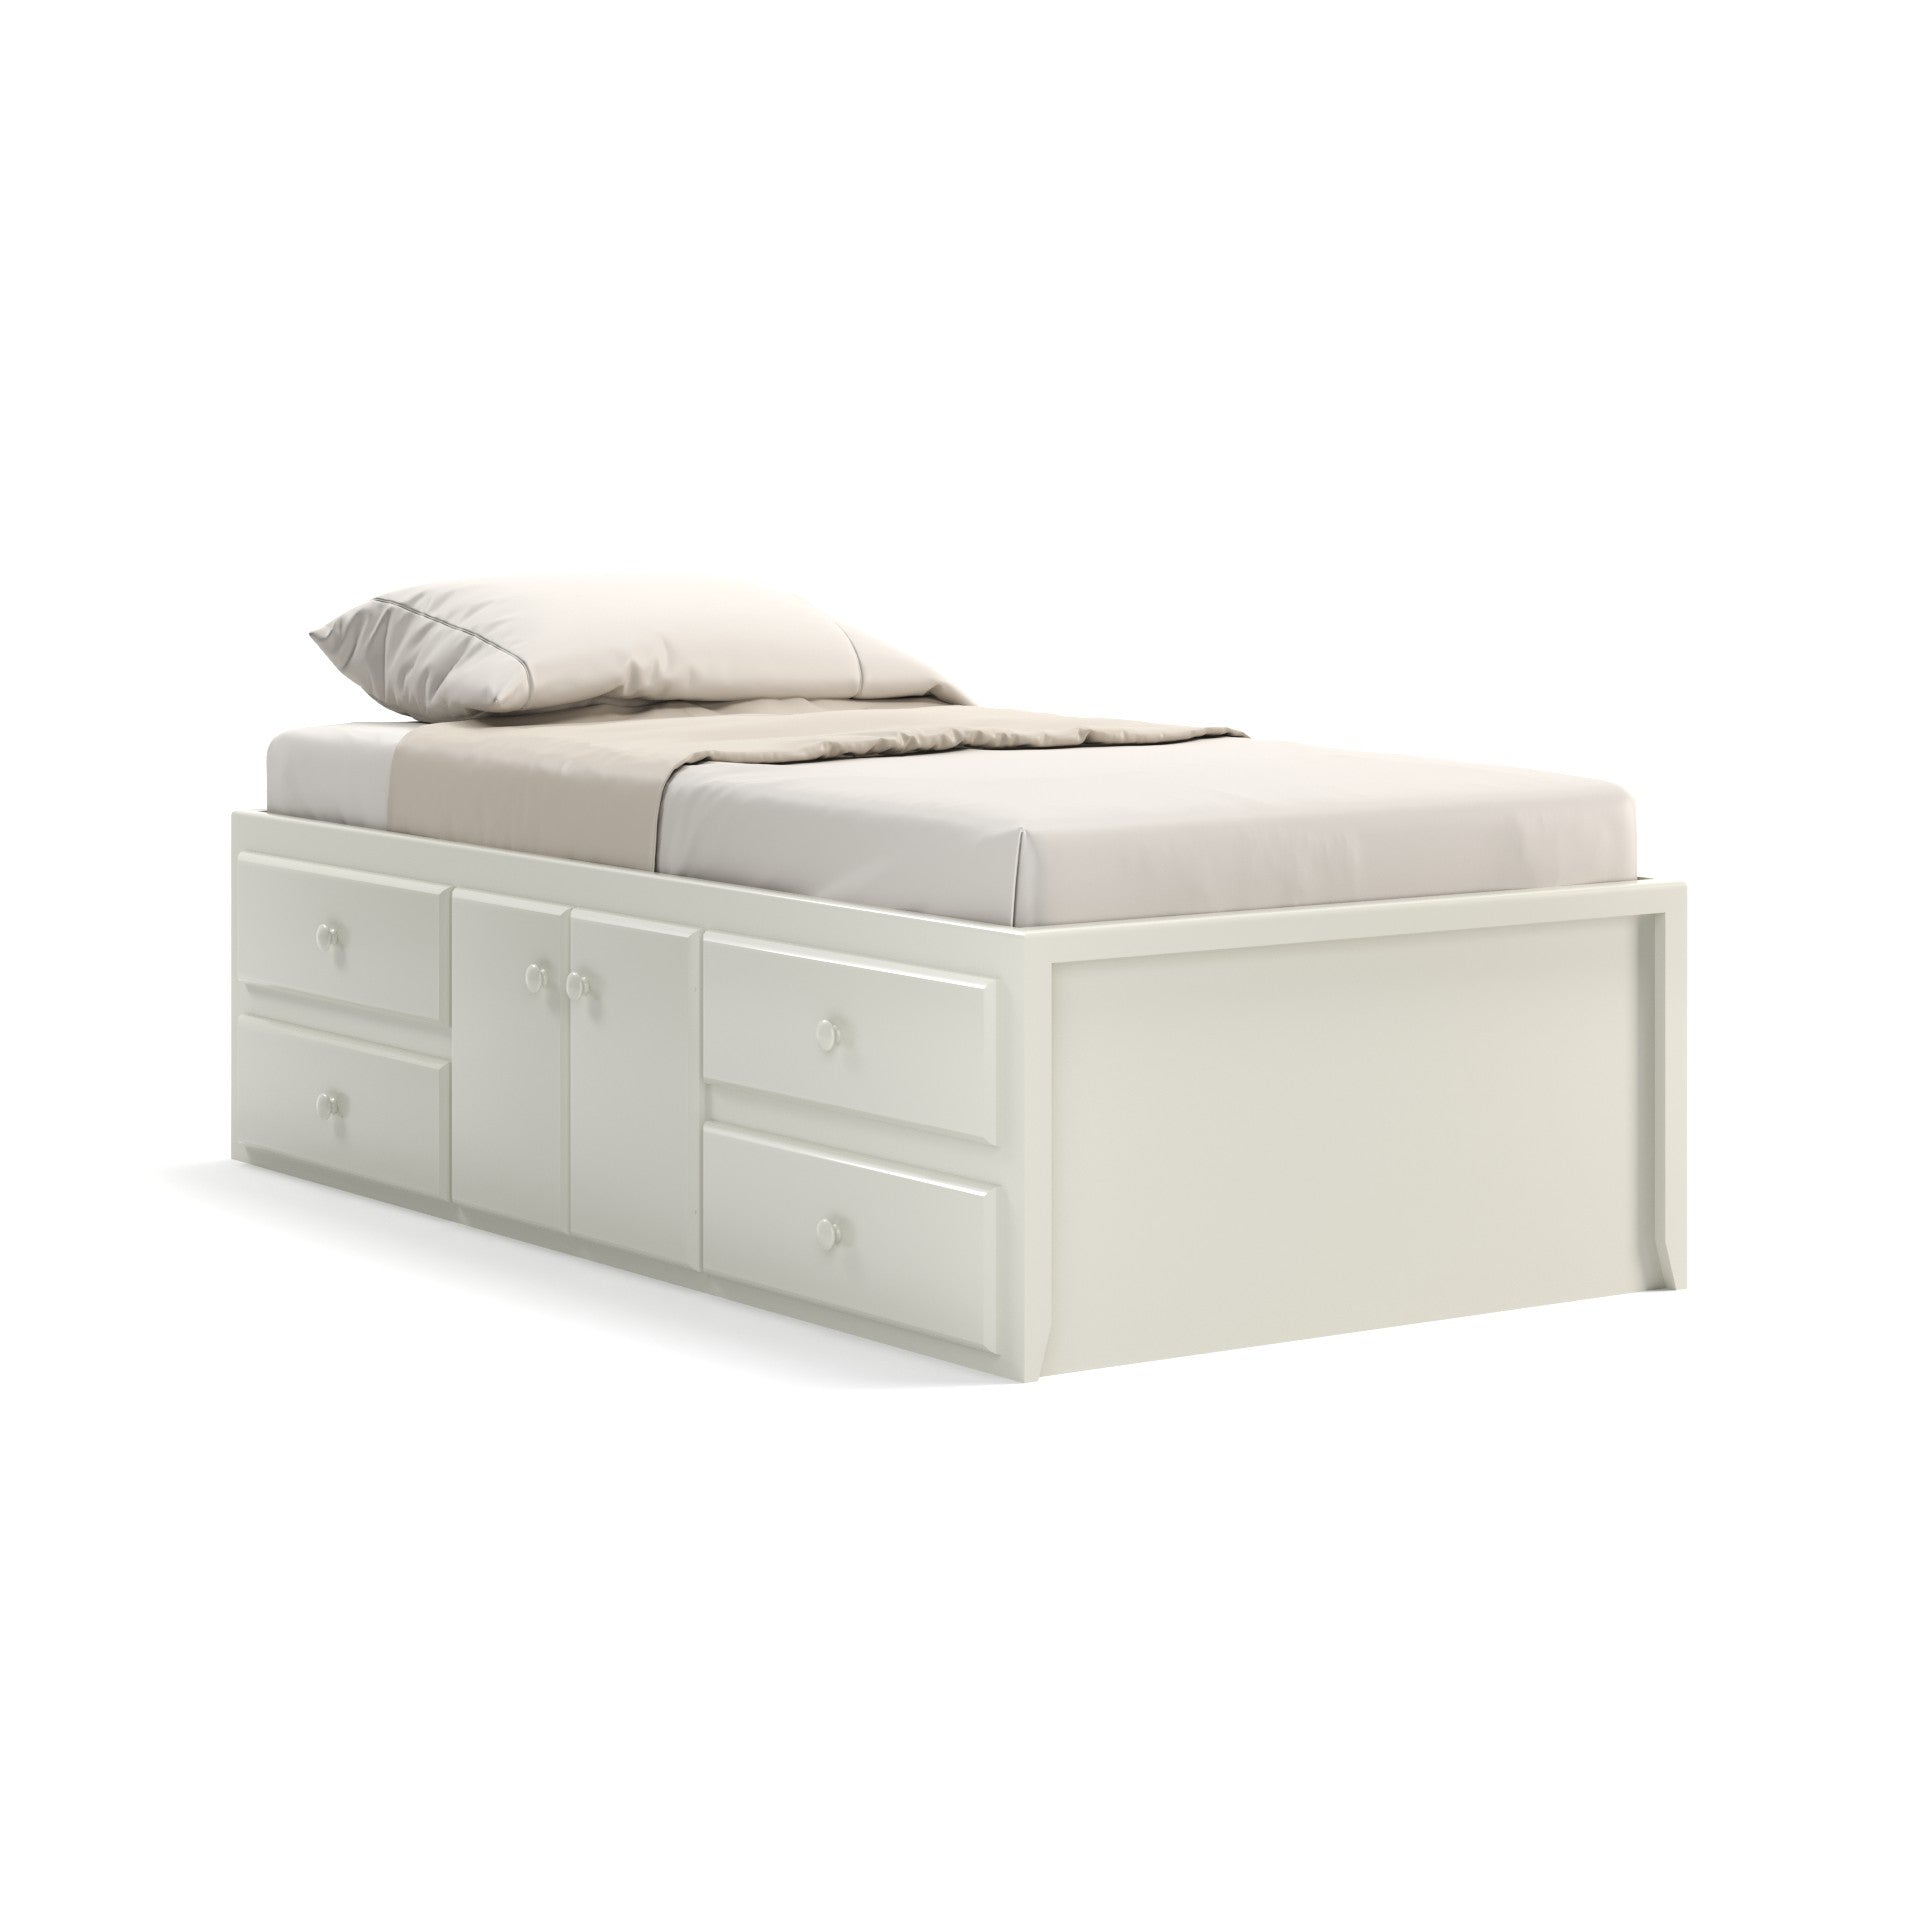 Acadia Shaker Storage Bed with Eight Drawers and Four Doors. Featuring four drawers and two doors on each side for storage, shown in white.